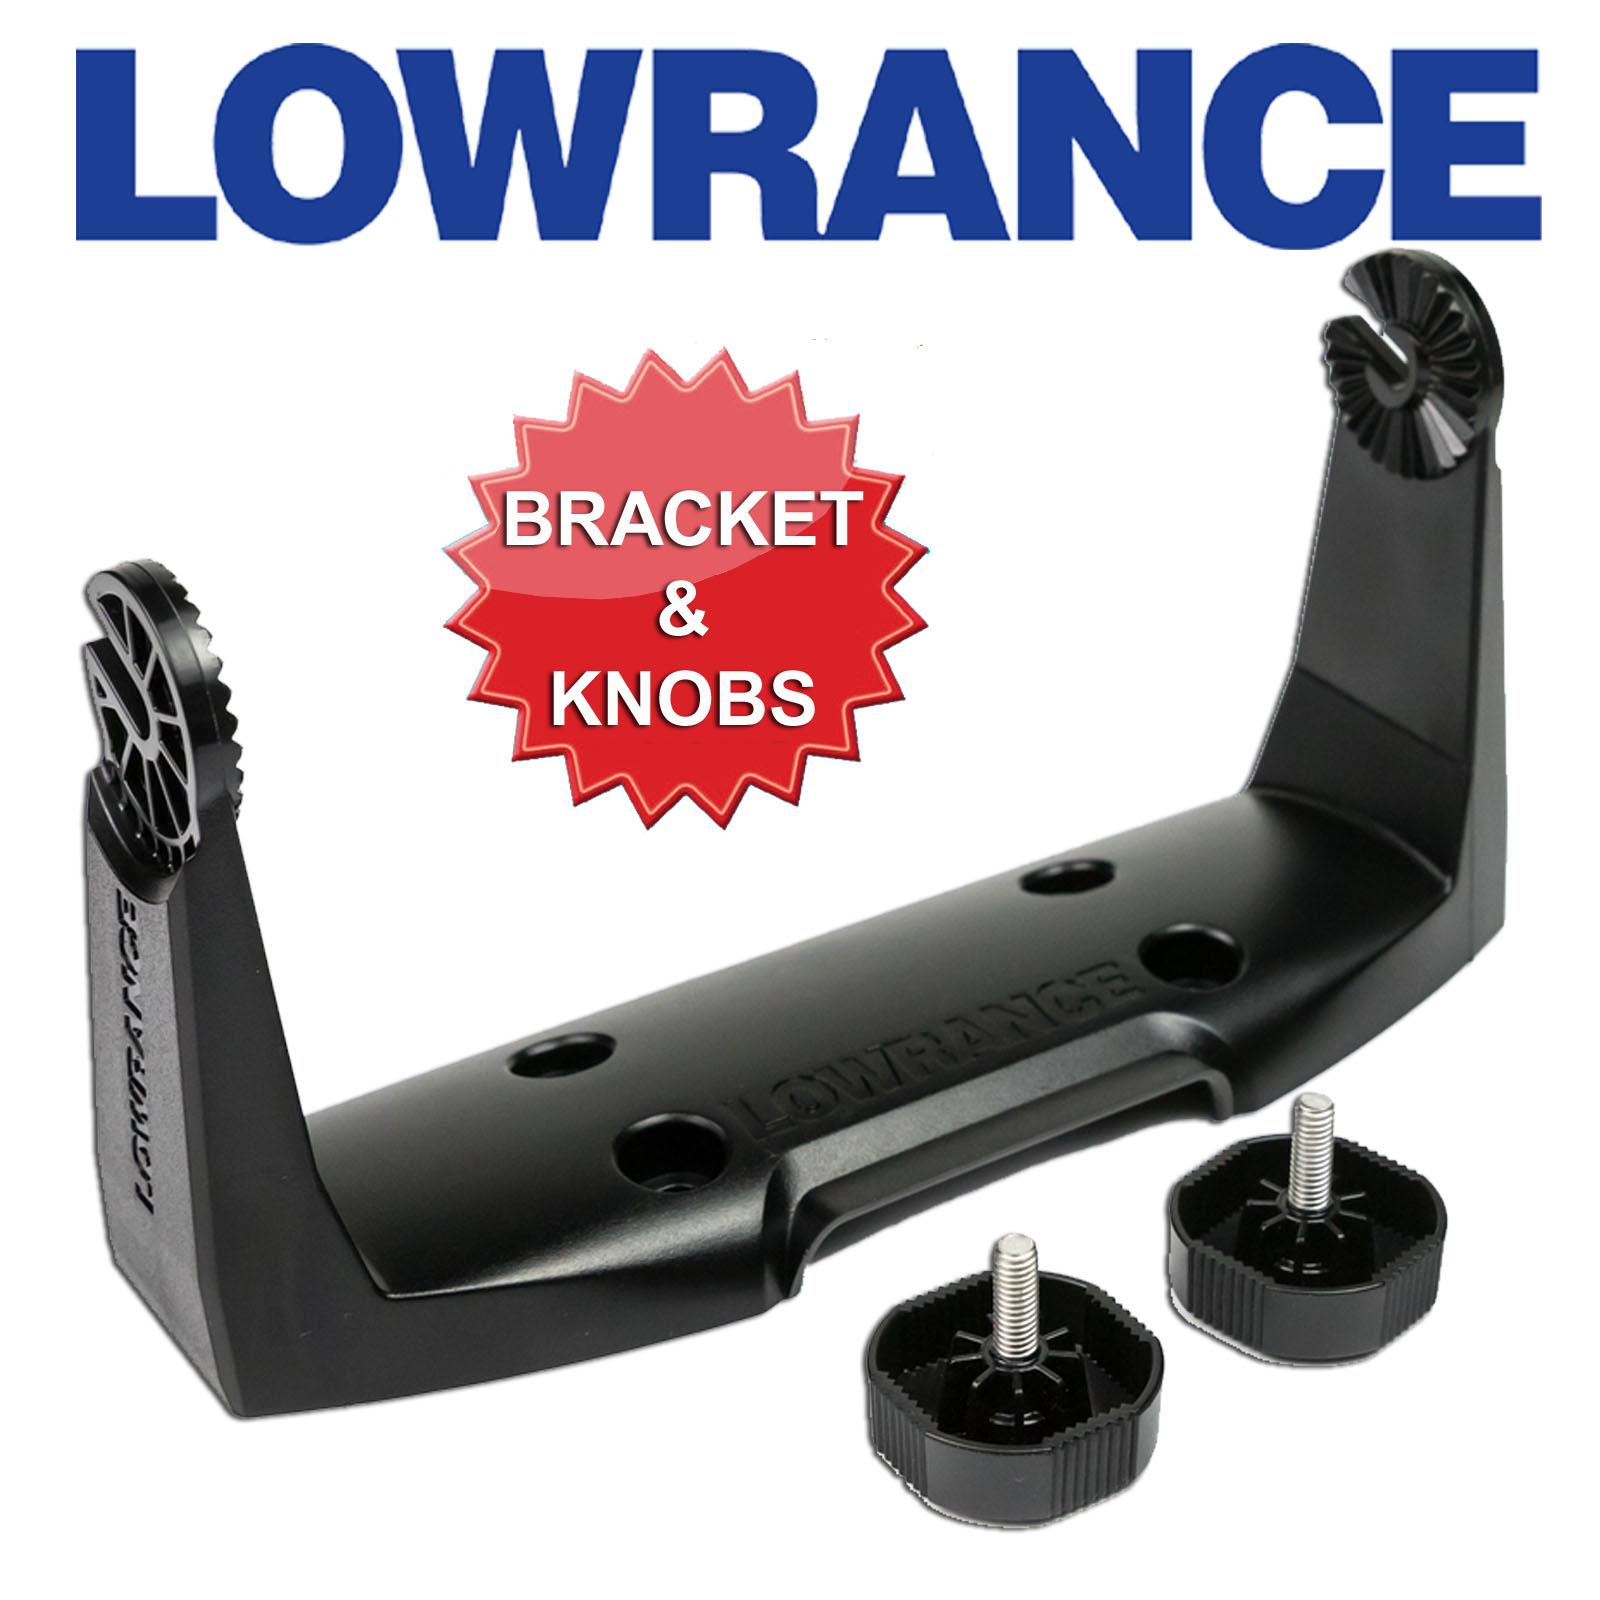 Lowrance Elite7 Hook2 7 HDS7 Gen 2 Touch Gen 3 Replacement Mounting Bracket  with Knobs Part#: 000-11